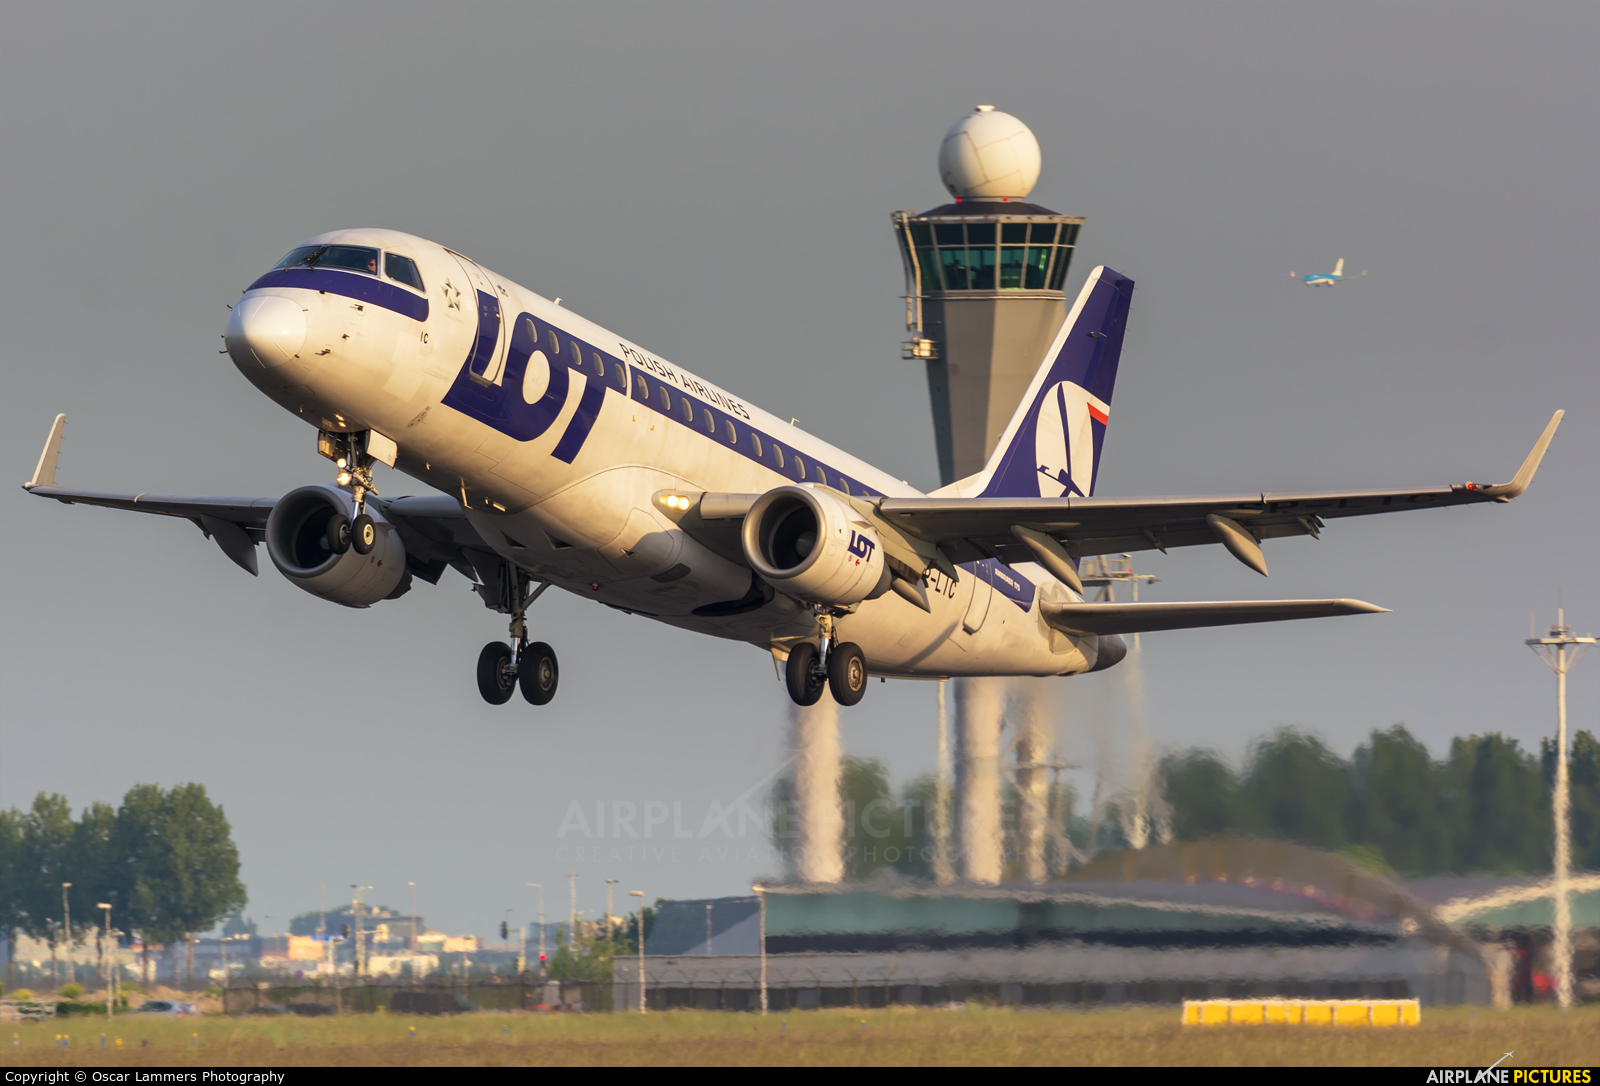 LOT - Polish Airlines SP-LIC aircraft at Amsterdam - Schiphol